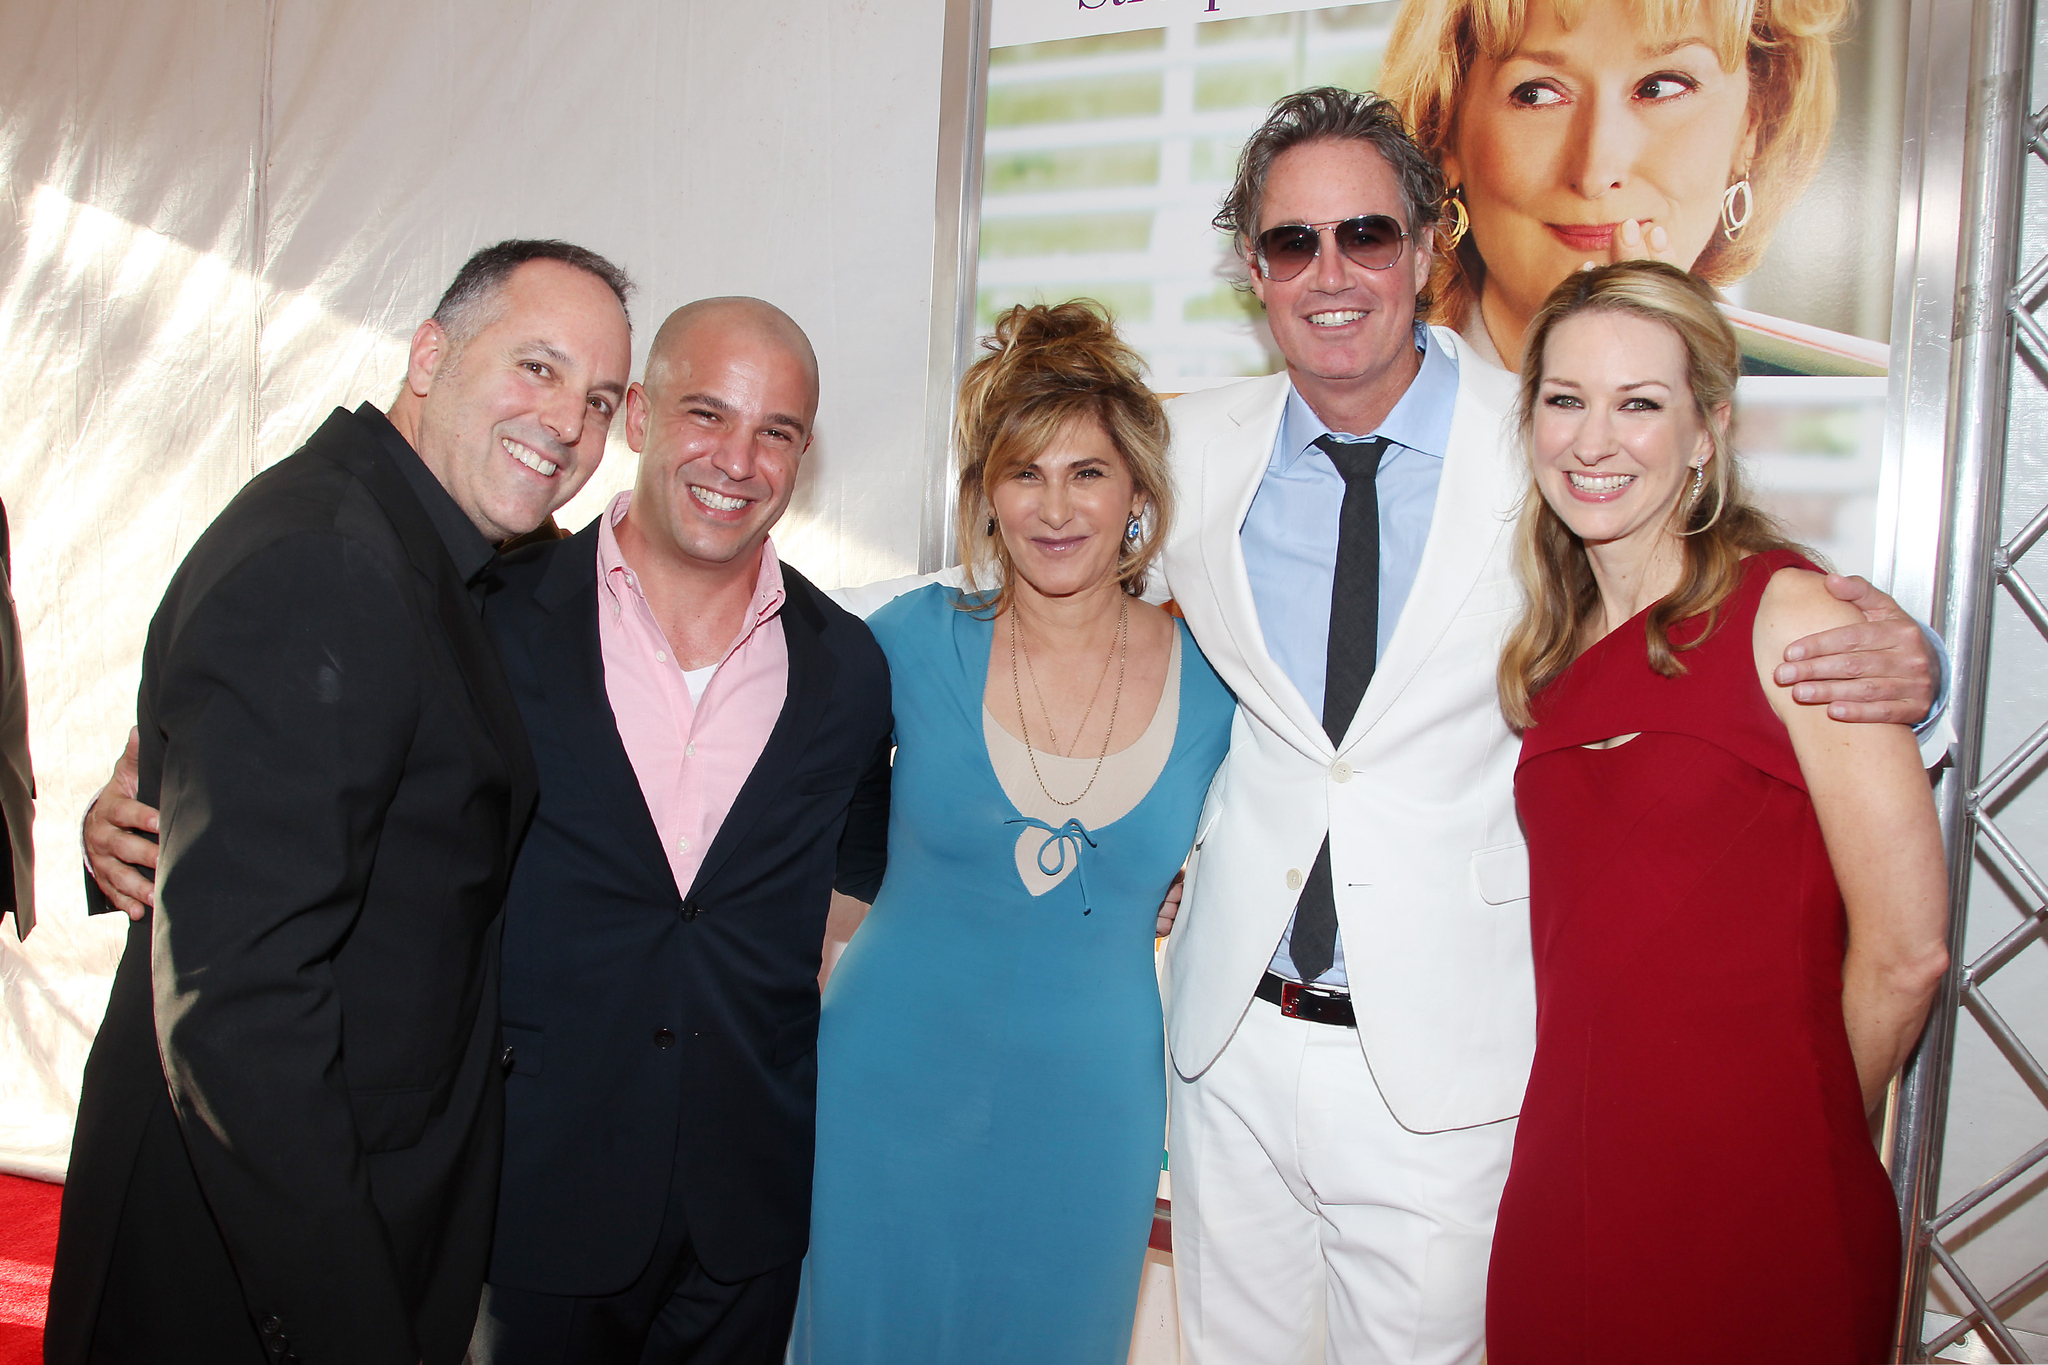 Todd Black, Guymon Casady, Vanessa Taylor, Nathan Kahane and Amy Pascal at event of Hope Springs (2012)